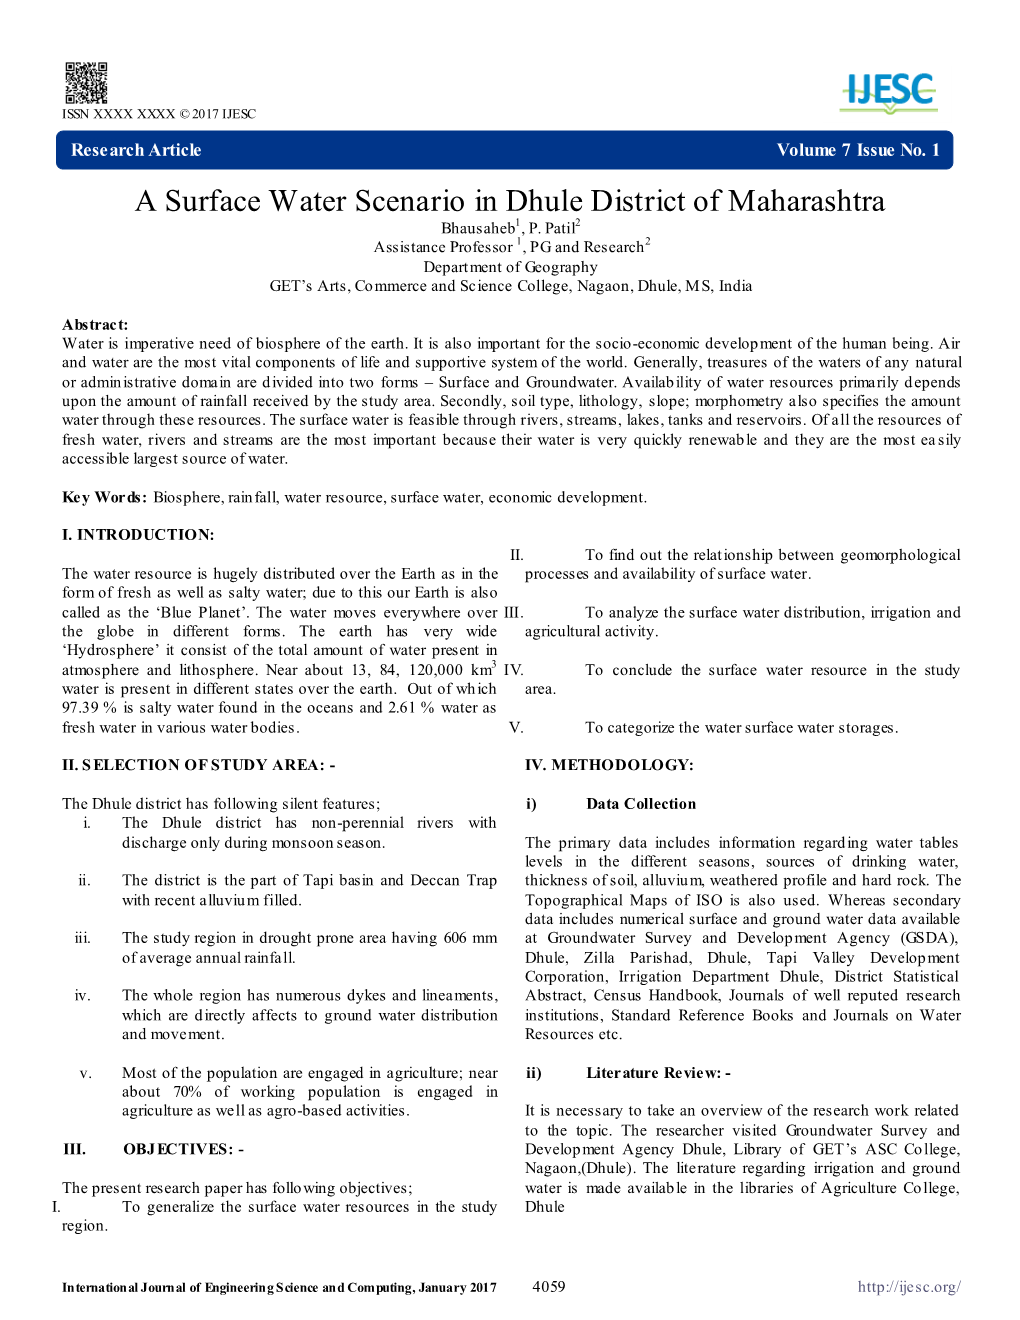 A Surface Water Scenario in Dhule District of Maharashtra Bhausaheb1, P